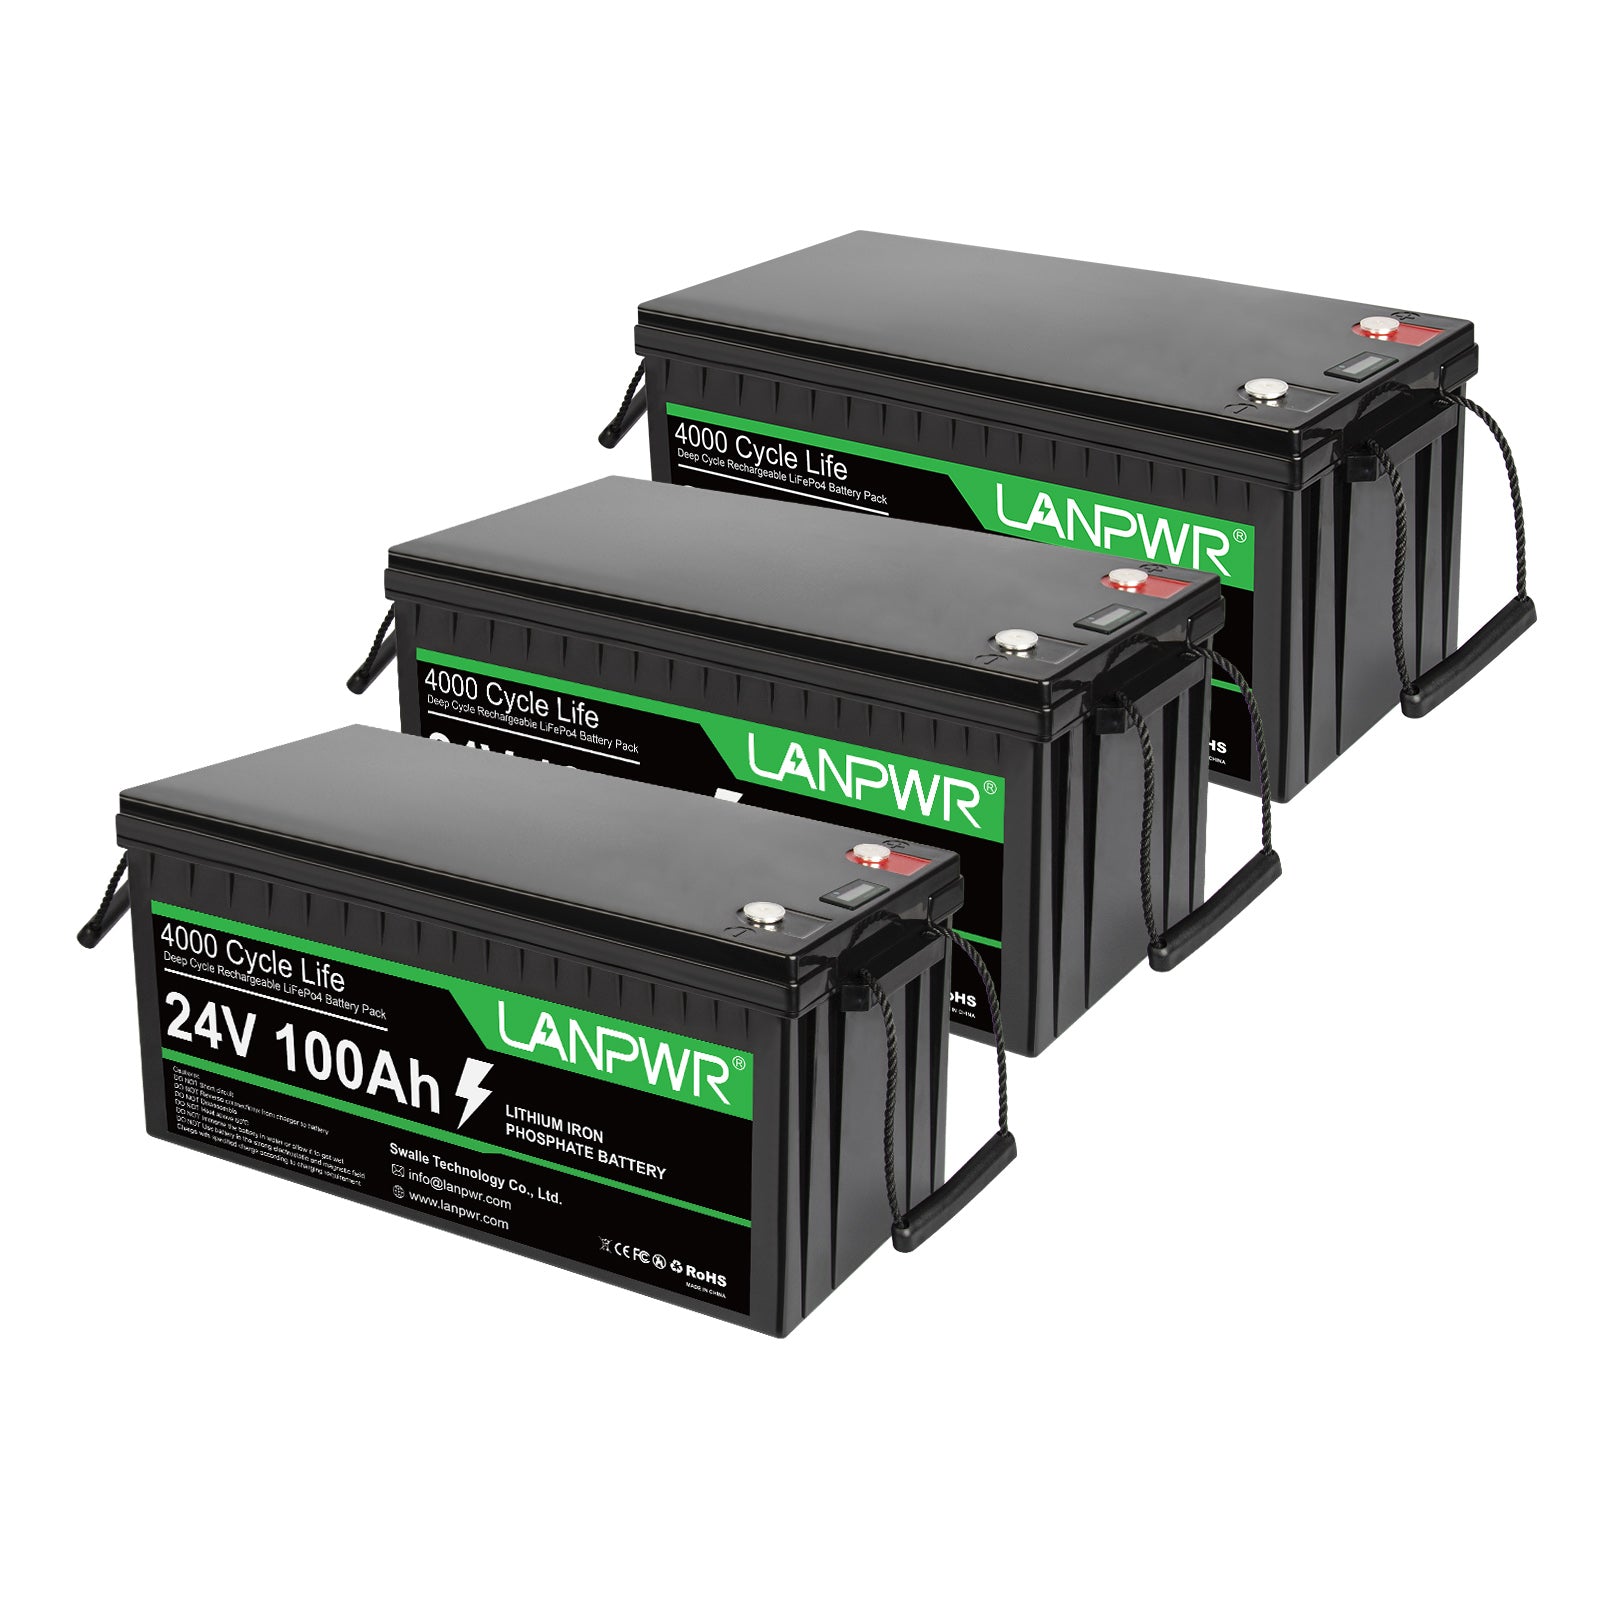 LANPWR 24V 100Ah LiFePO4 Lithium Battery LiFePO4 Battery Max. 2560W Load Power, Perfect for Camping, Motorhome, Solar System, Boat and Off-Grid System